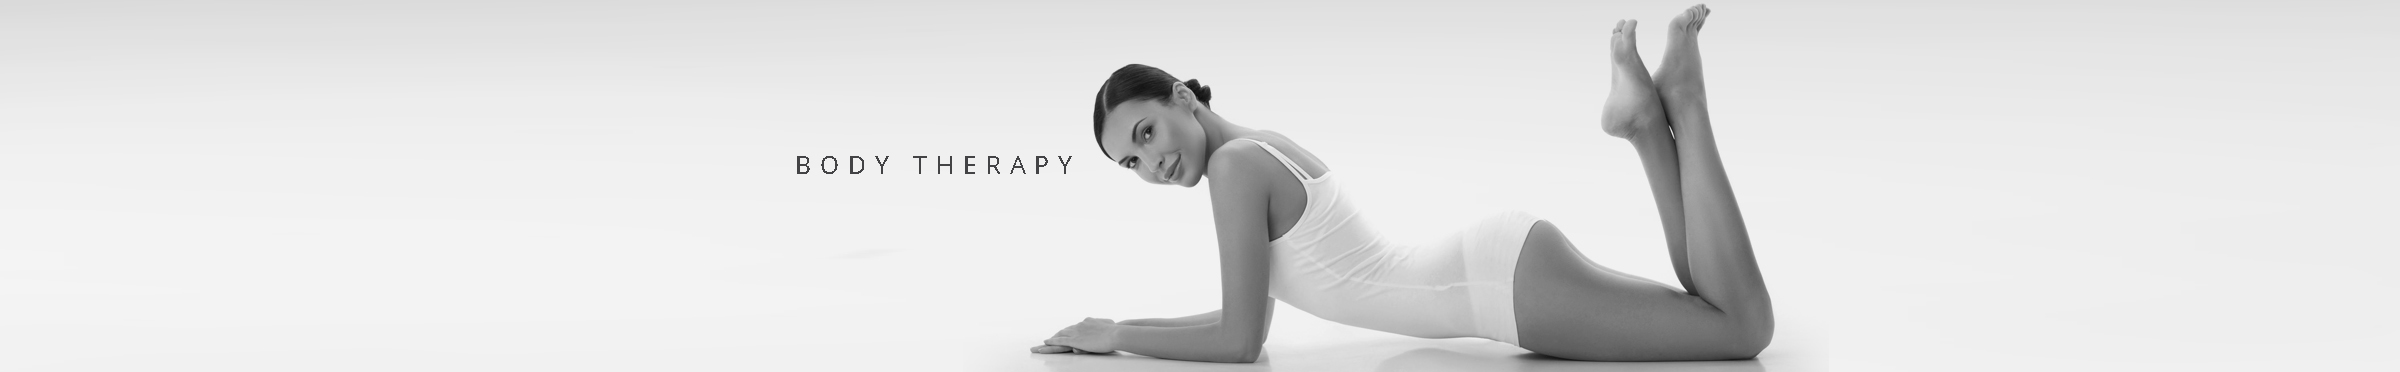 BODY THERAPY BANNER